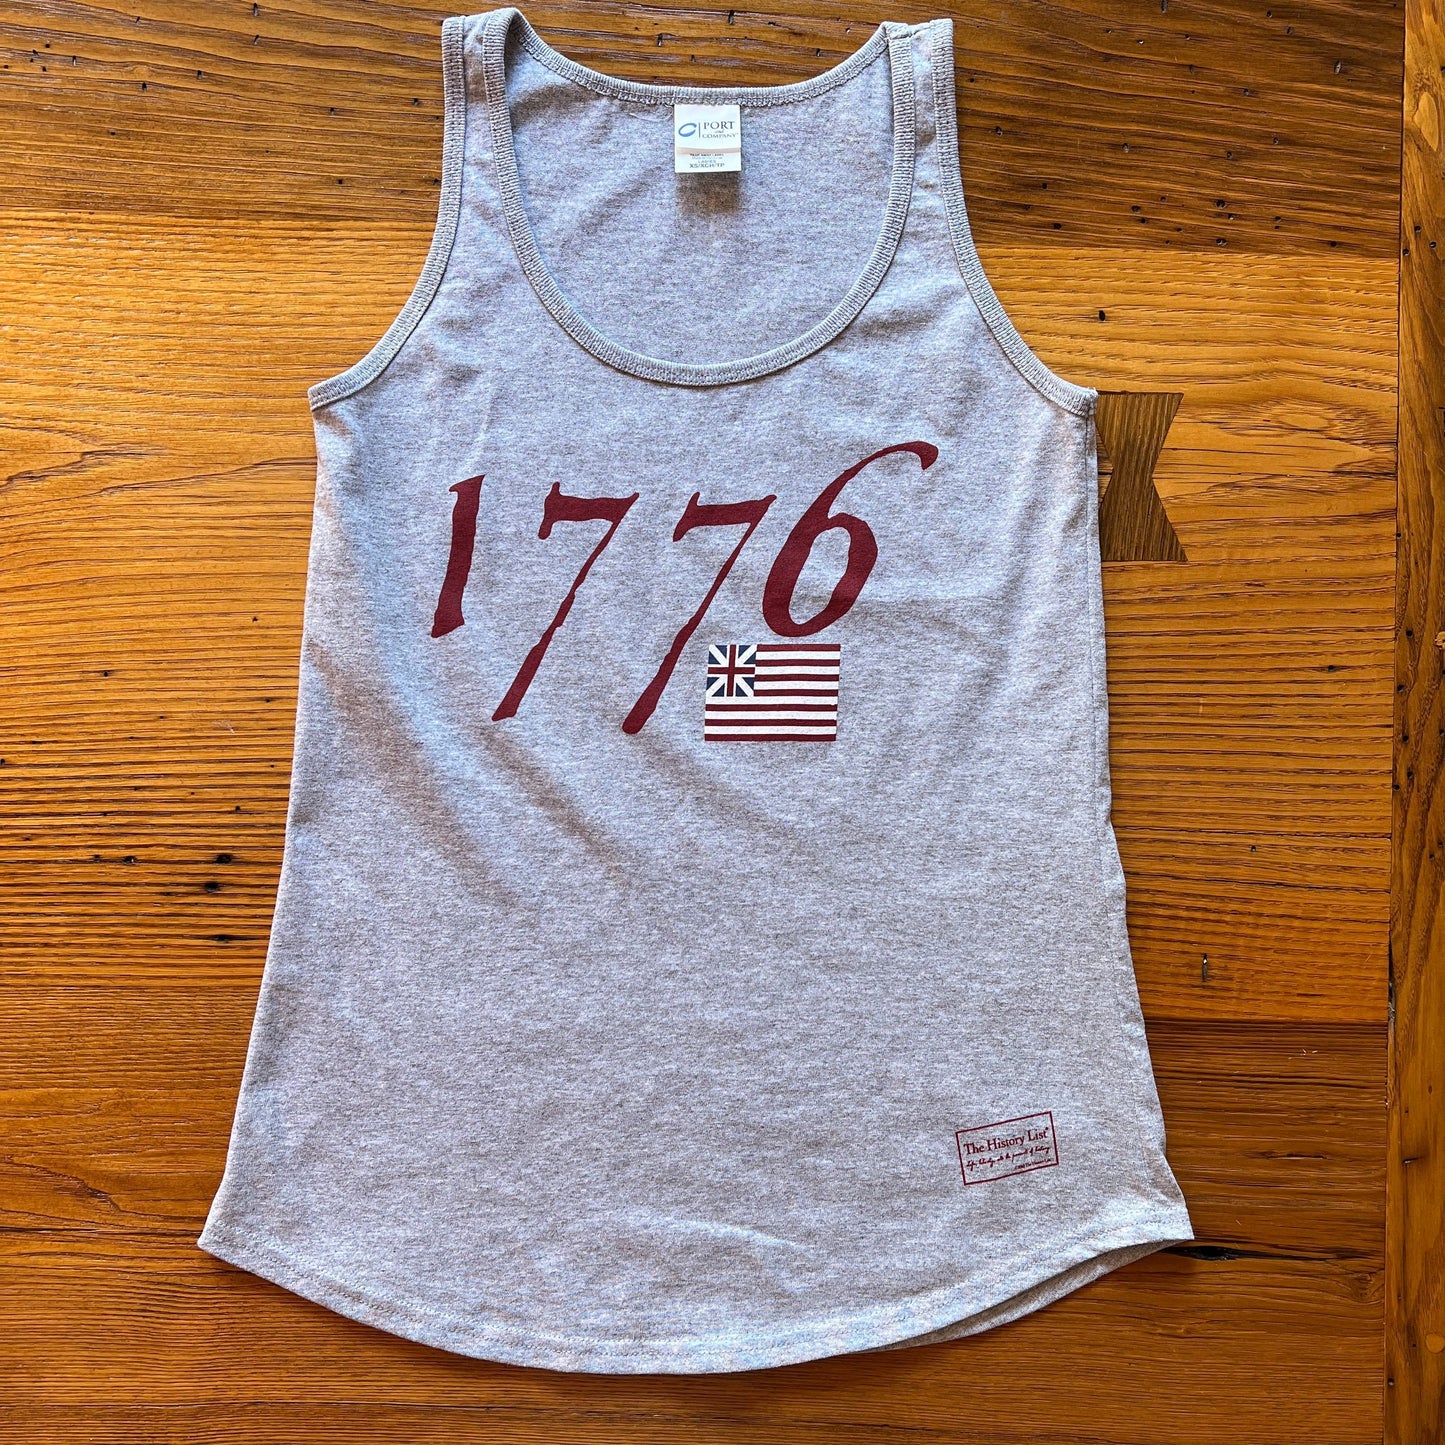 "We hold these truths - July 4, 1776” Tank top for women - Grey from The History List Store